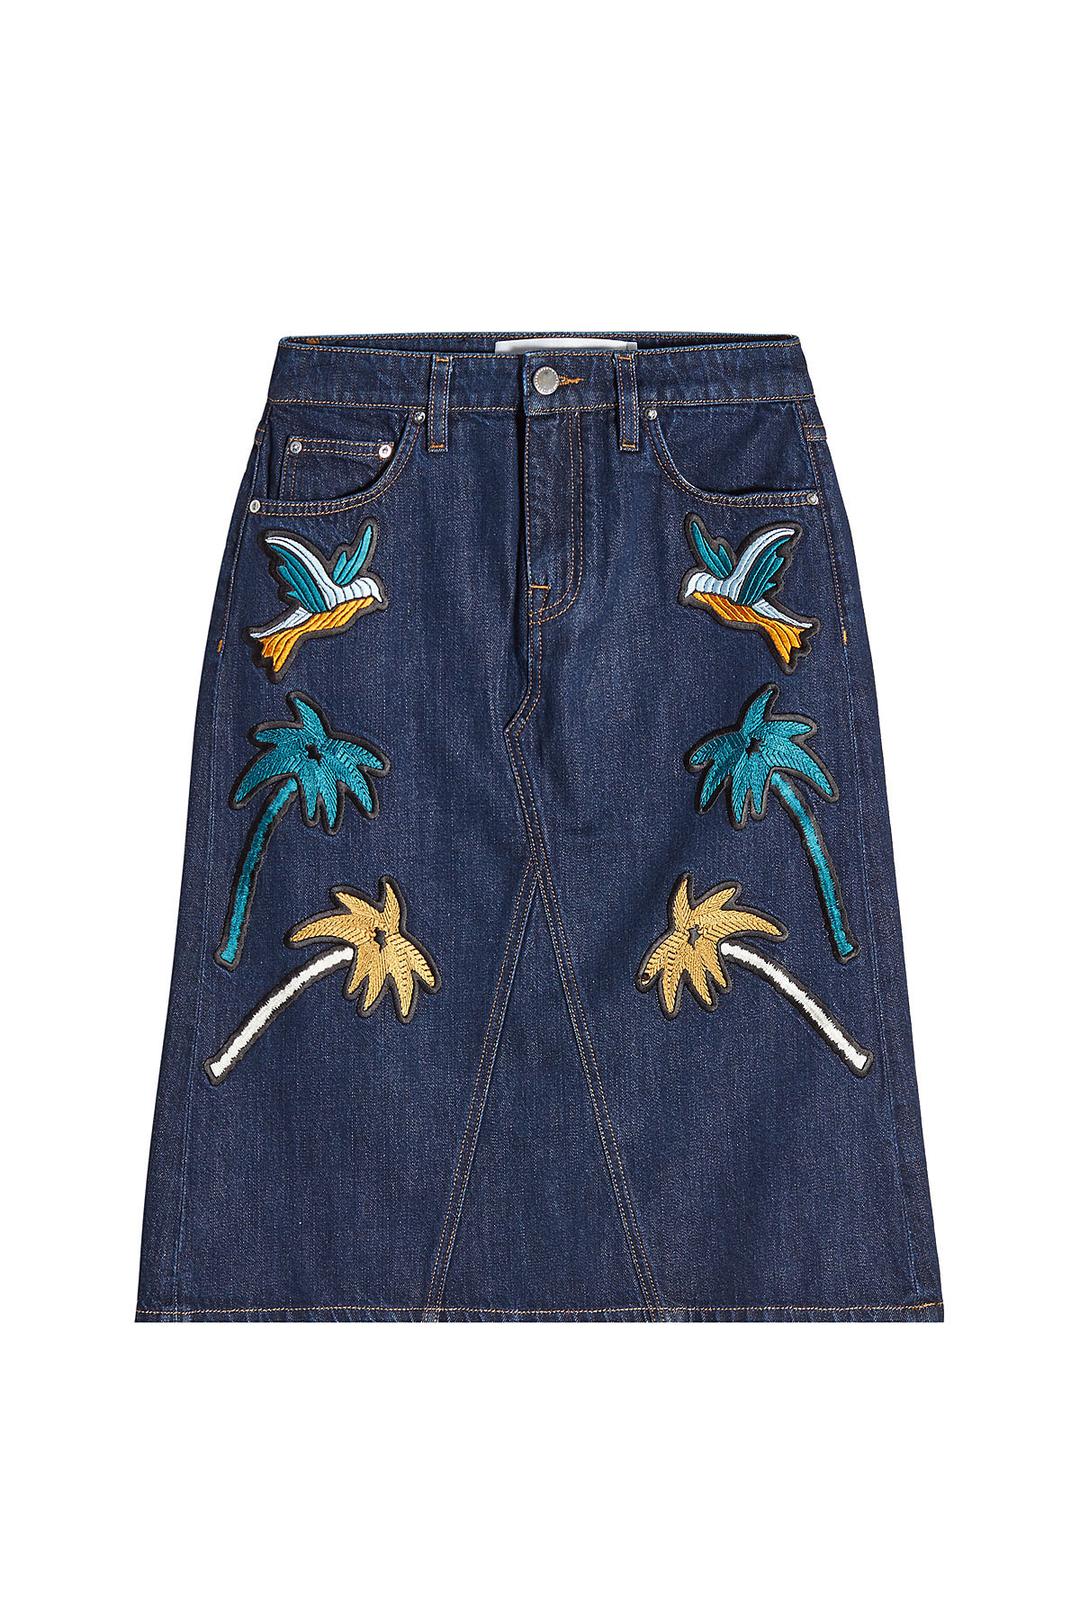 16 Embroidered Denim Skirts to Wear All Spring | Who What Wear